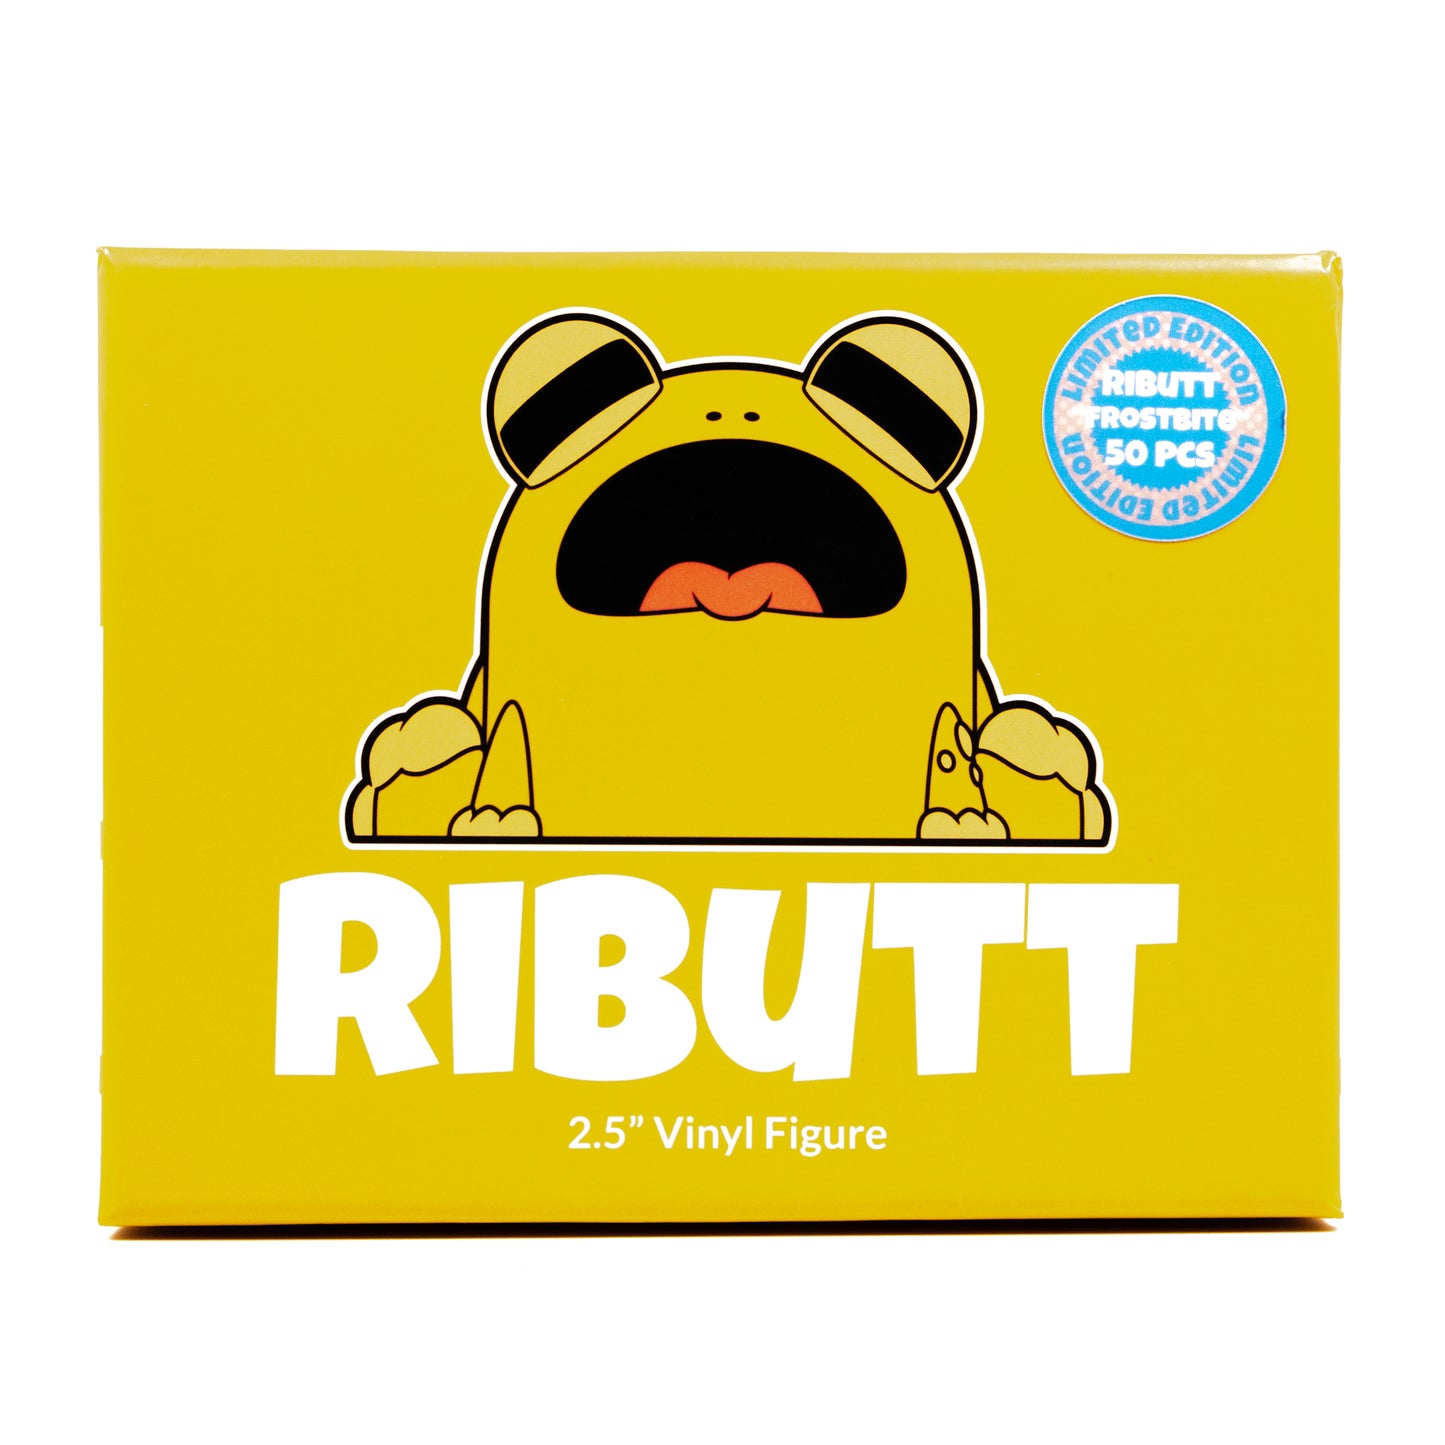 Ributt Frostbite Limited Edition Vinyl Figure